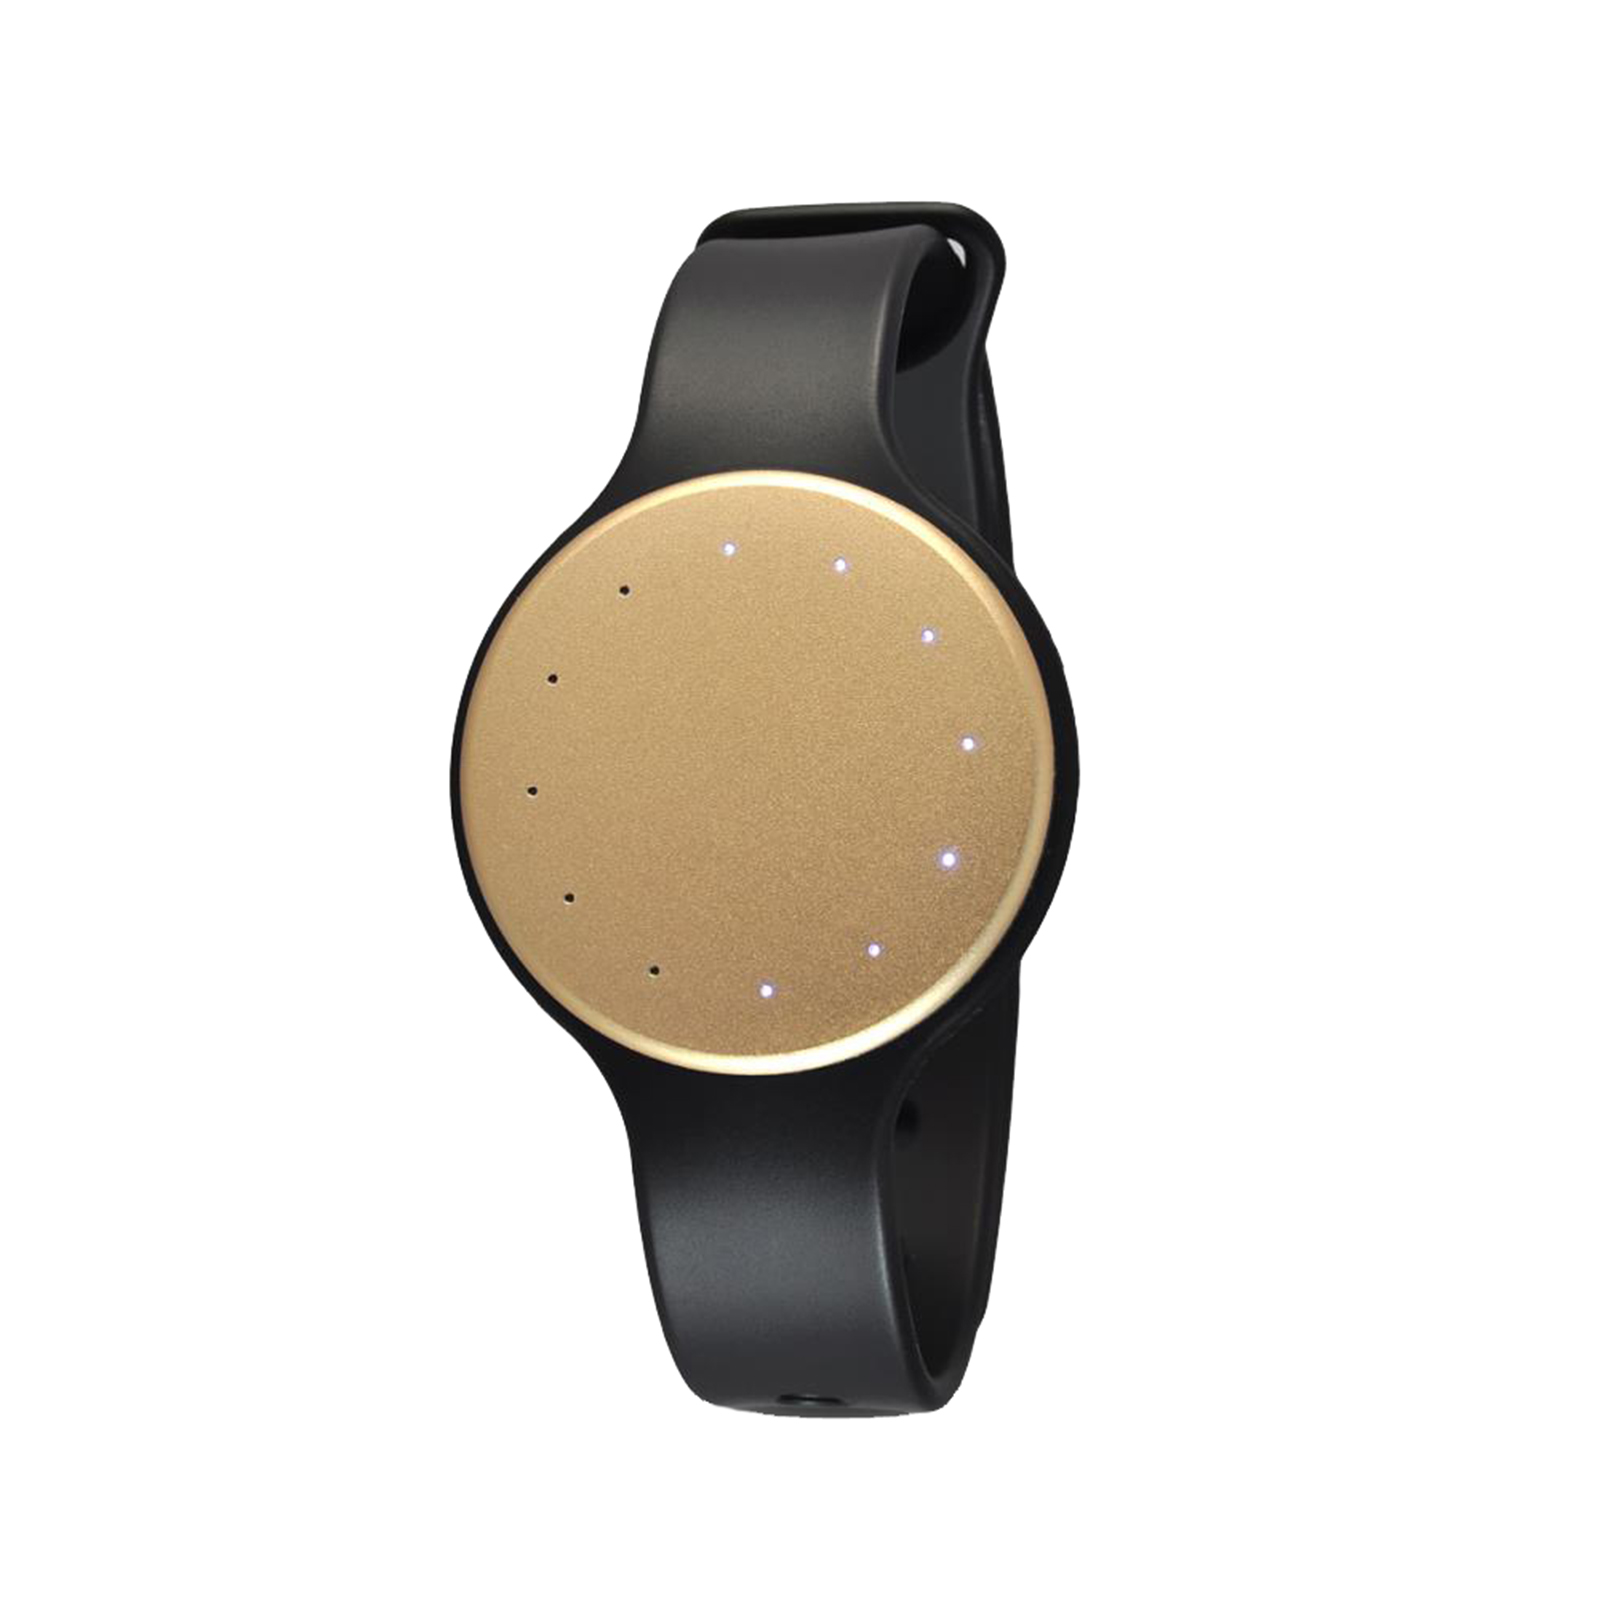 Fitmotion Smart Activity Tracker (Sleep Monitor + Step Counter + Distance Traveled), Gold - image 1 of 1